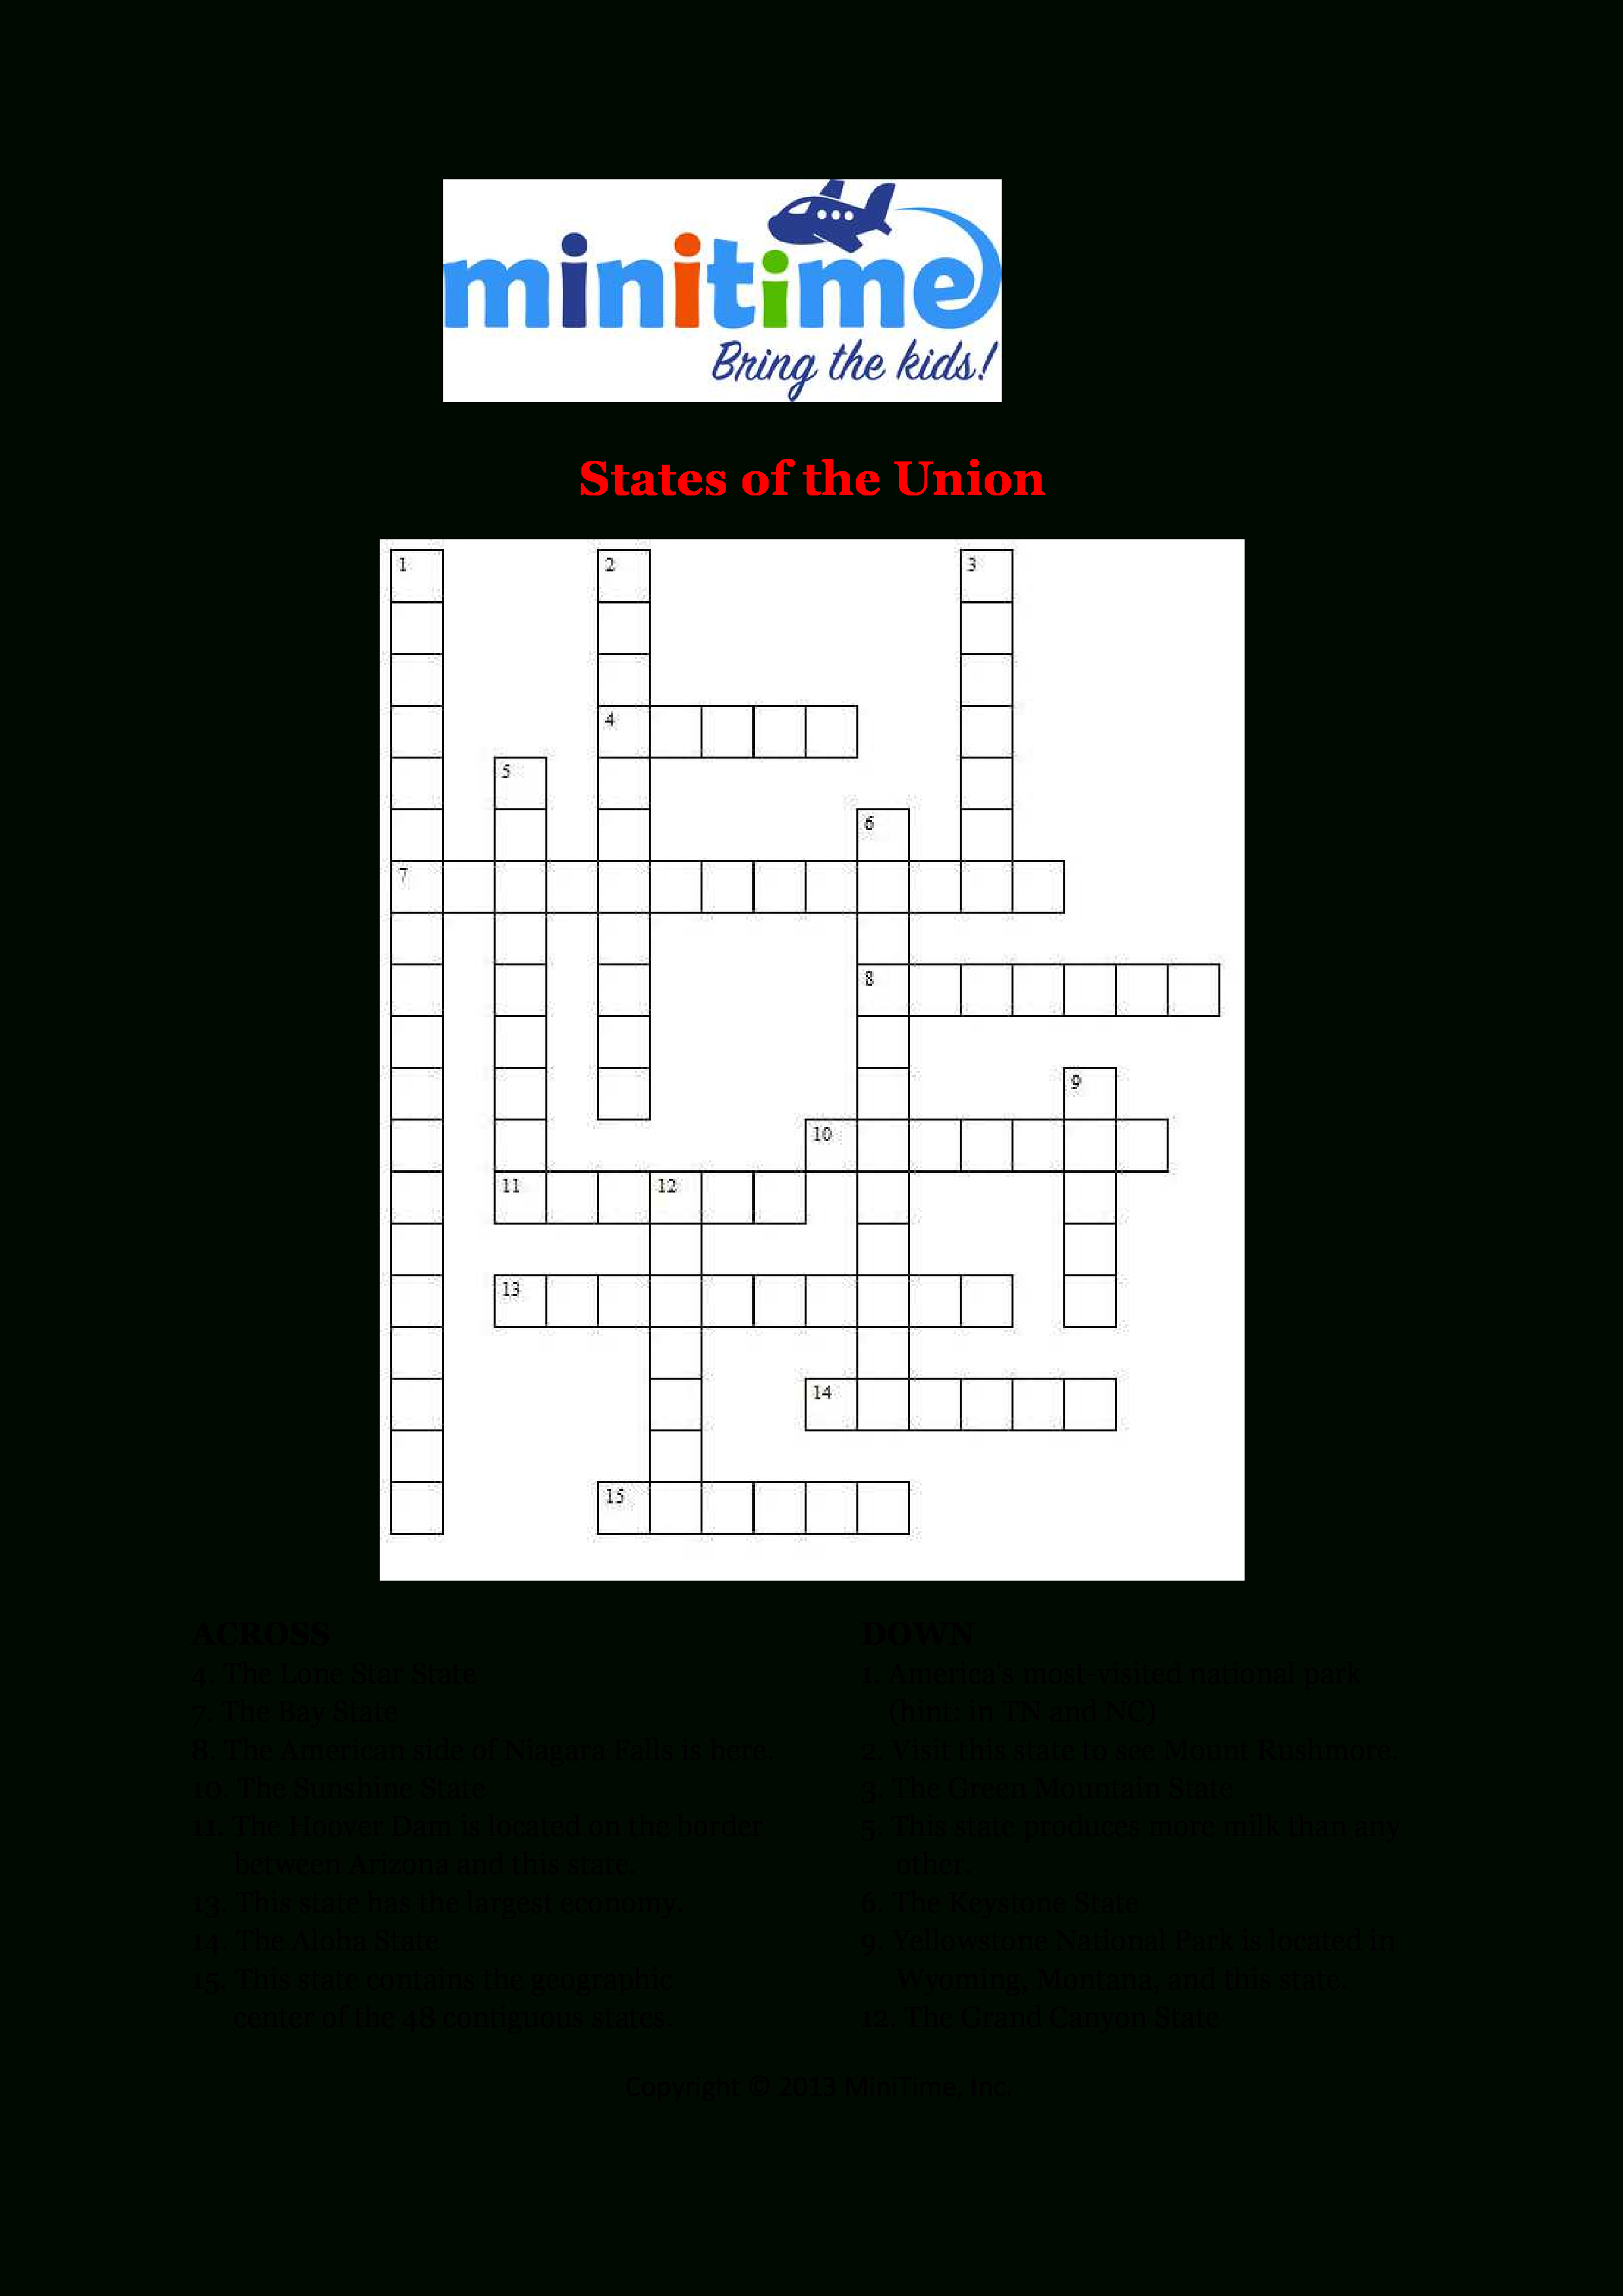 Us States Fun Facts Crossword Puzzles | Free Printable Travel - Printable Crossword Puzzles About Cars